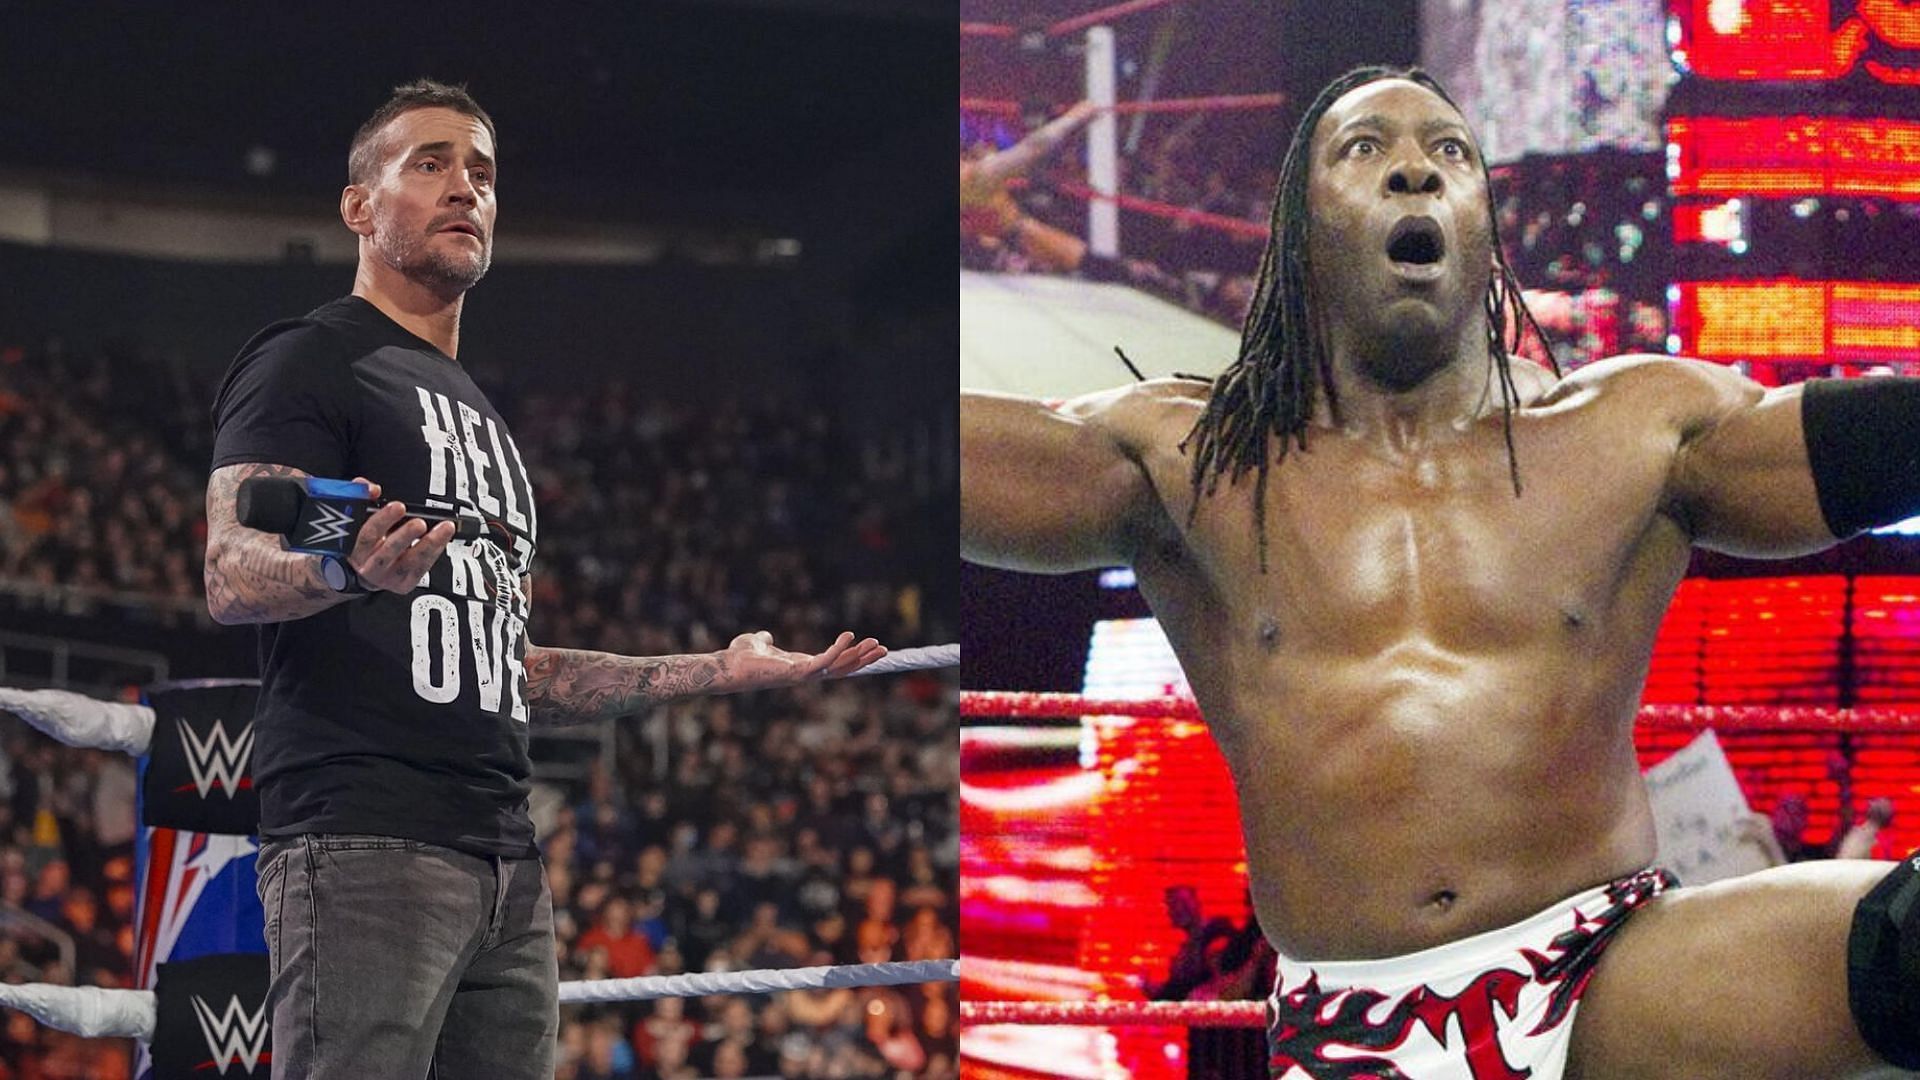 CM Punk almost got into an altercation with Booker T